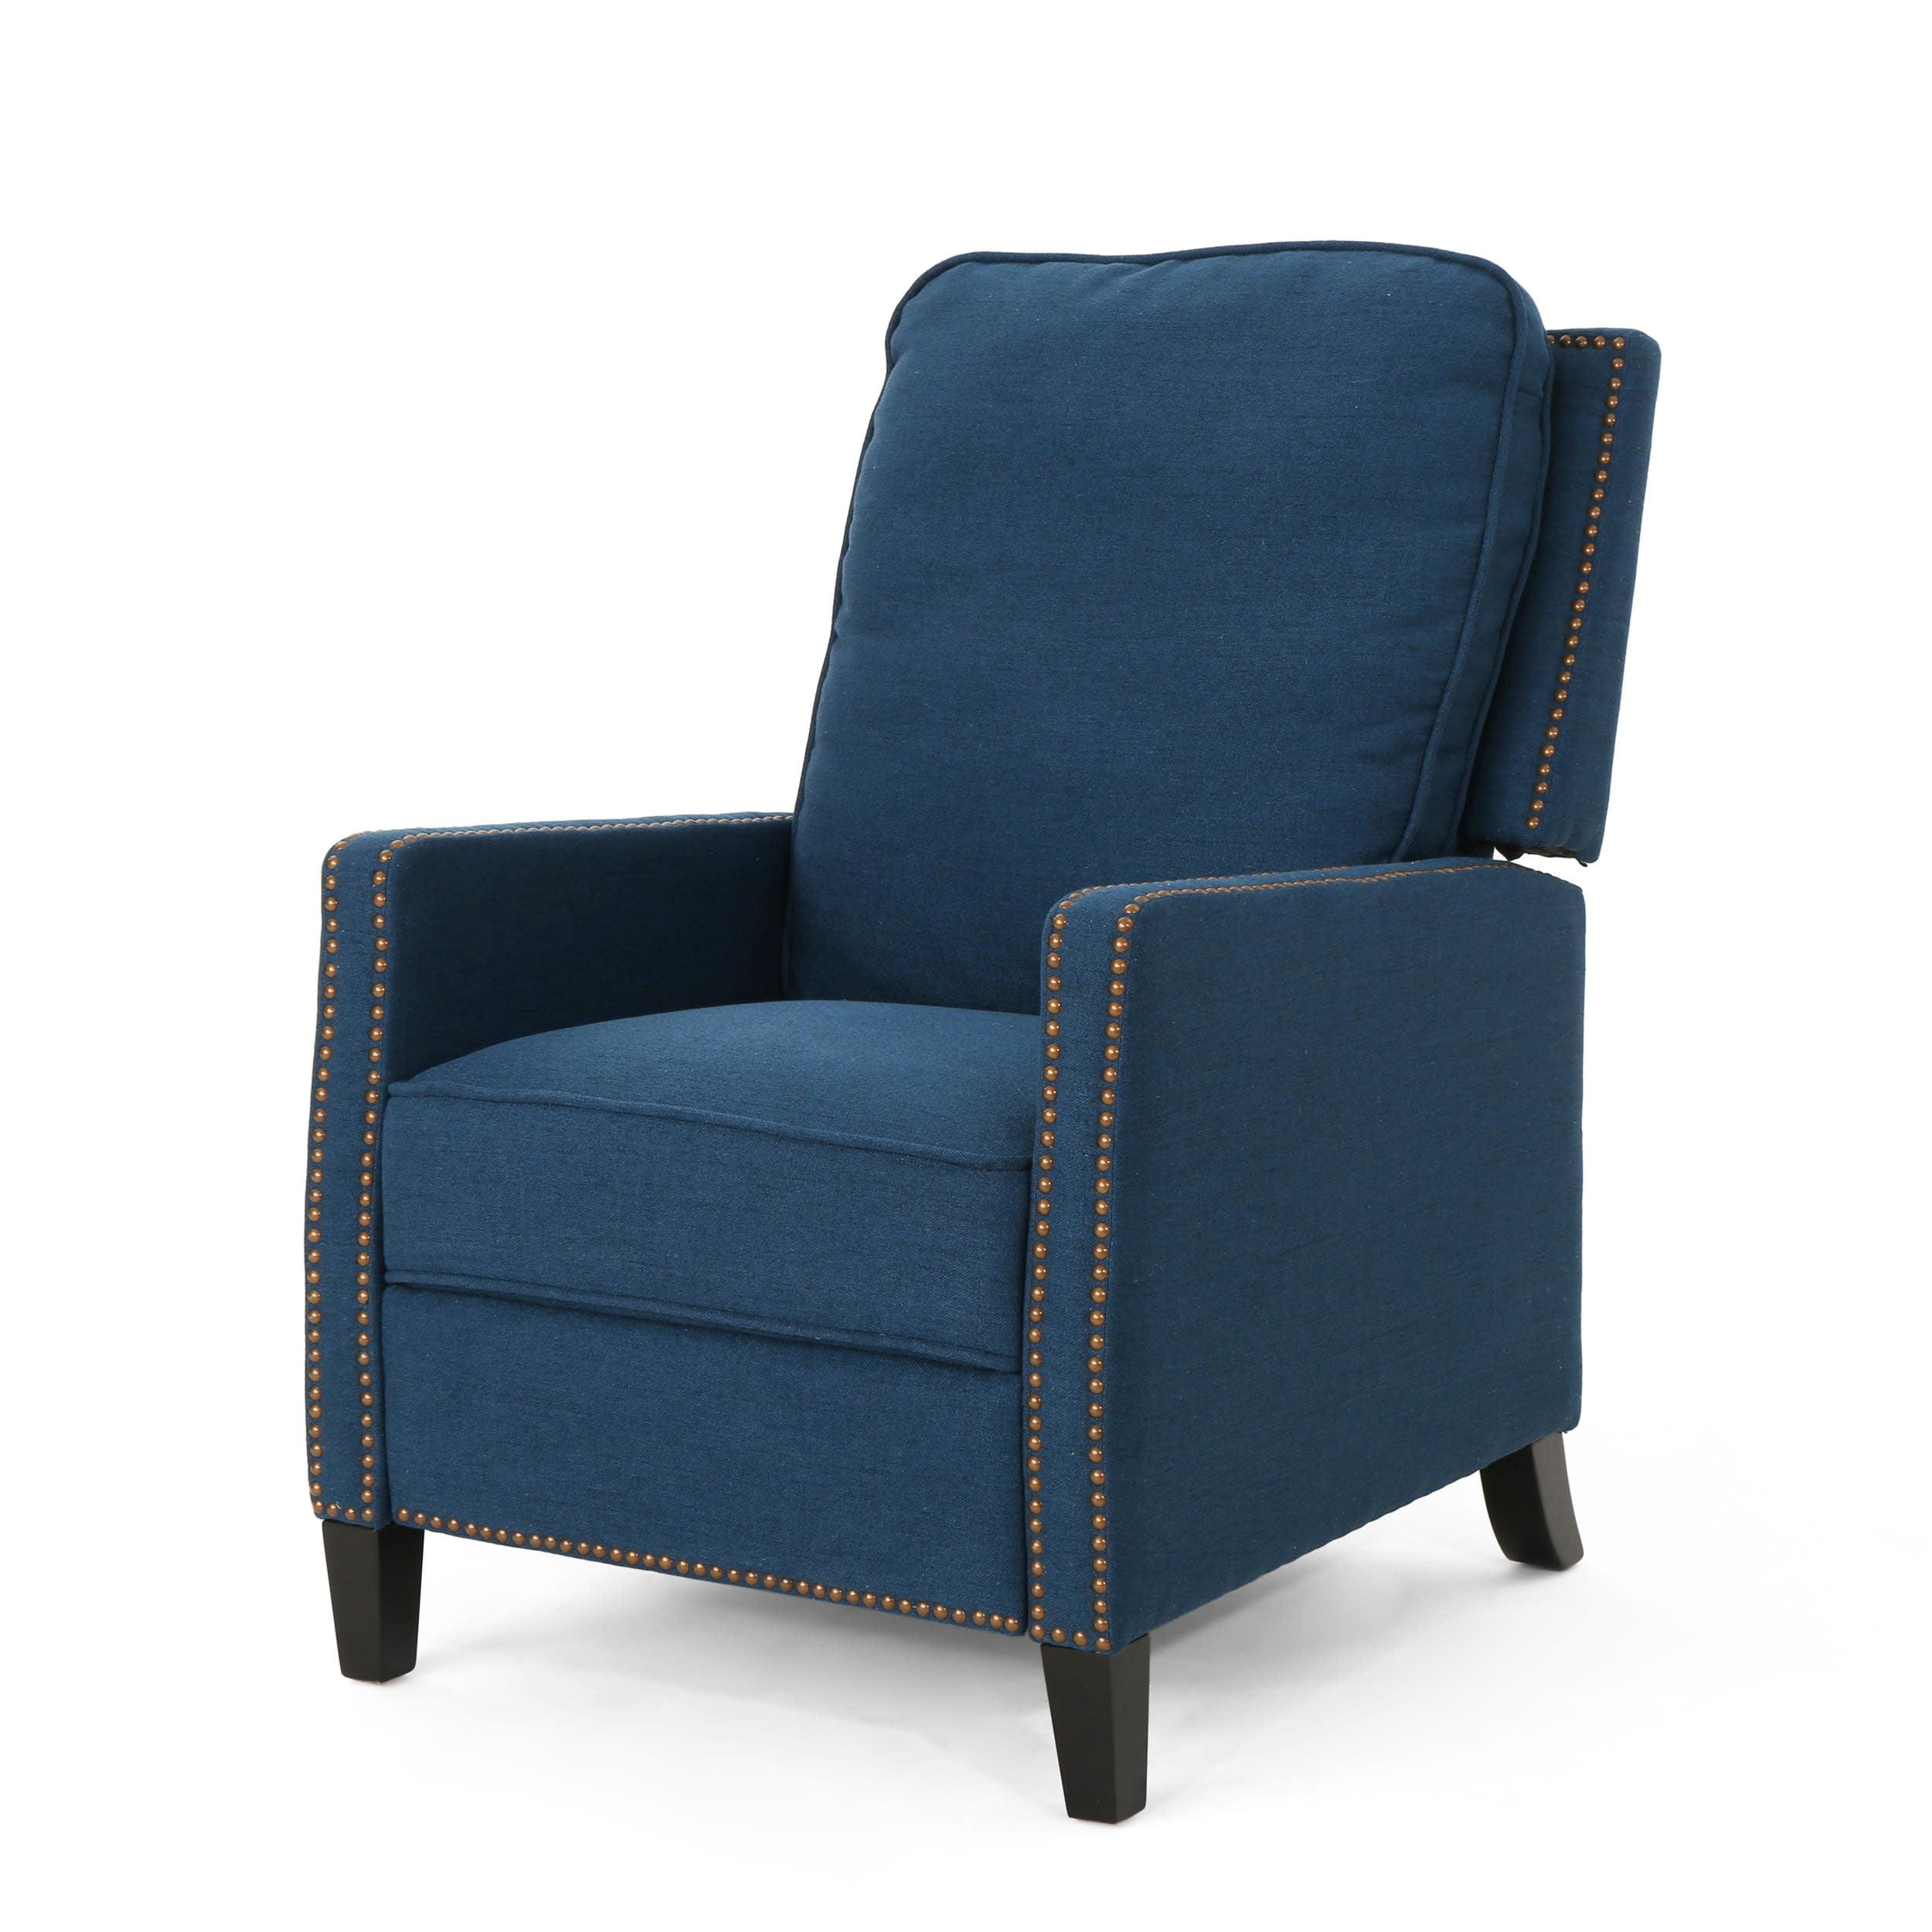 Handcrafted Navy Blue Wood Pushback Recliner with Nailhead Trim